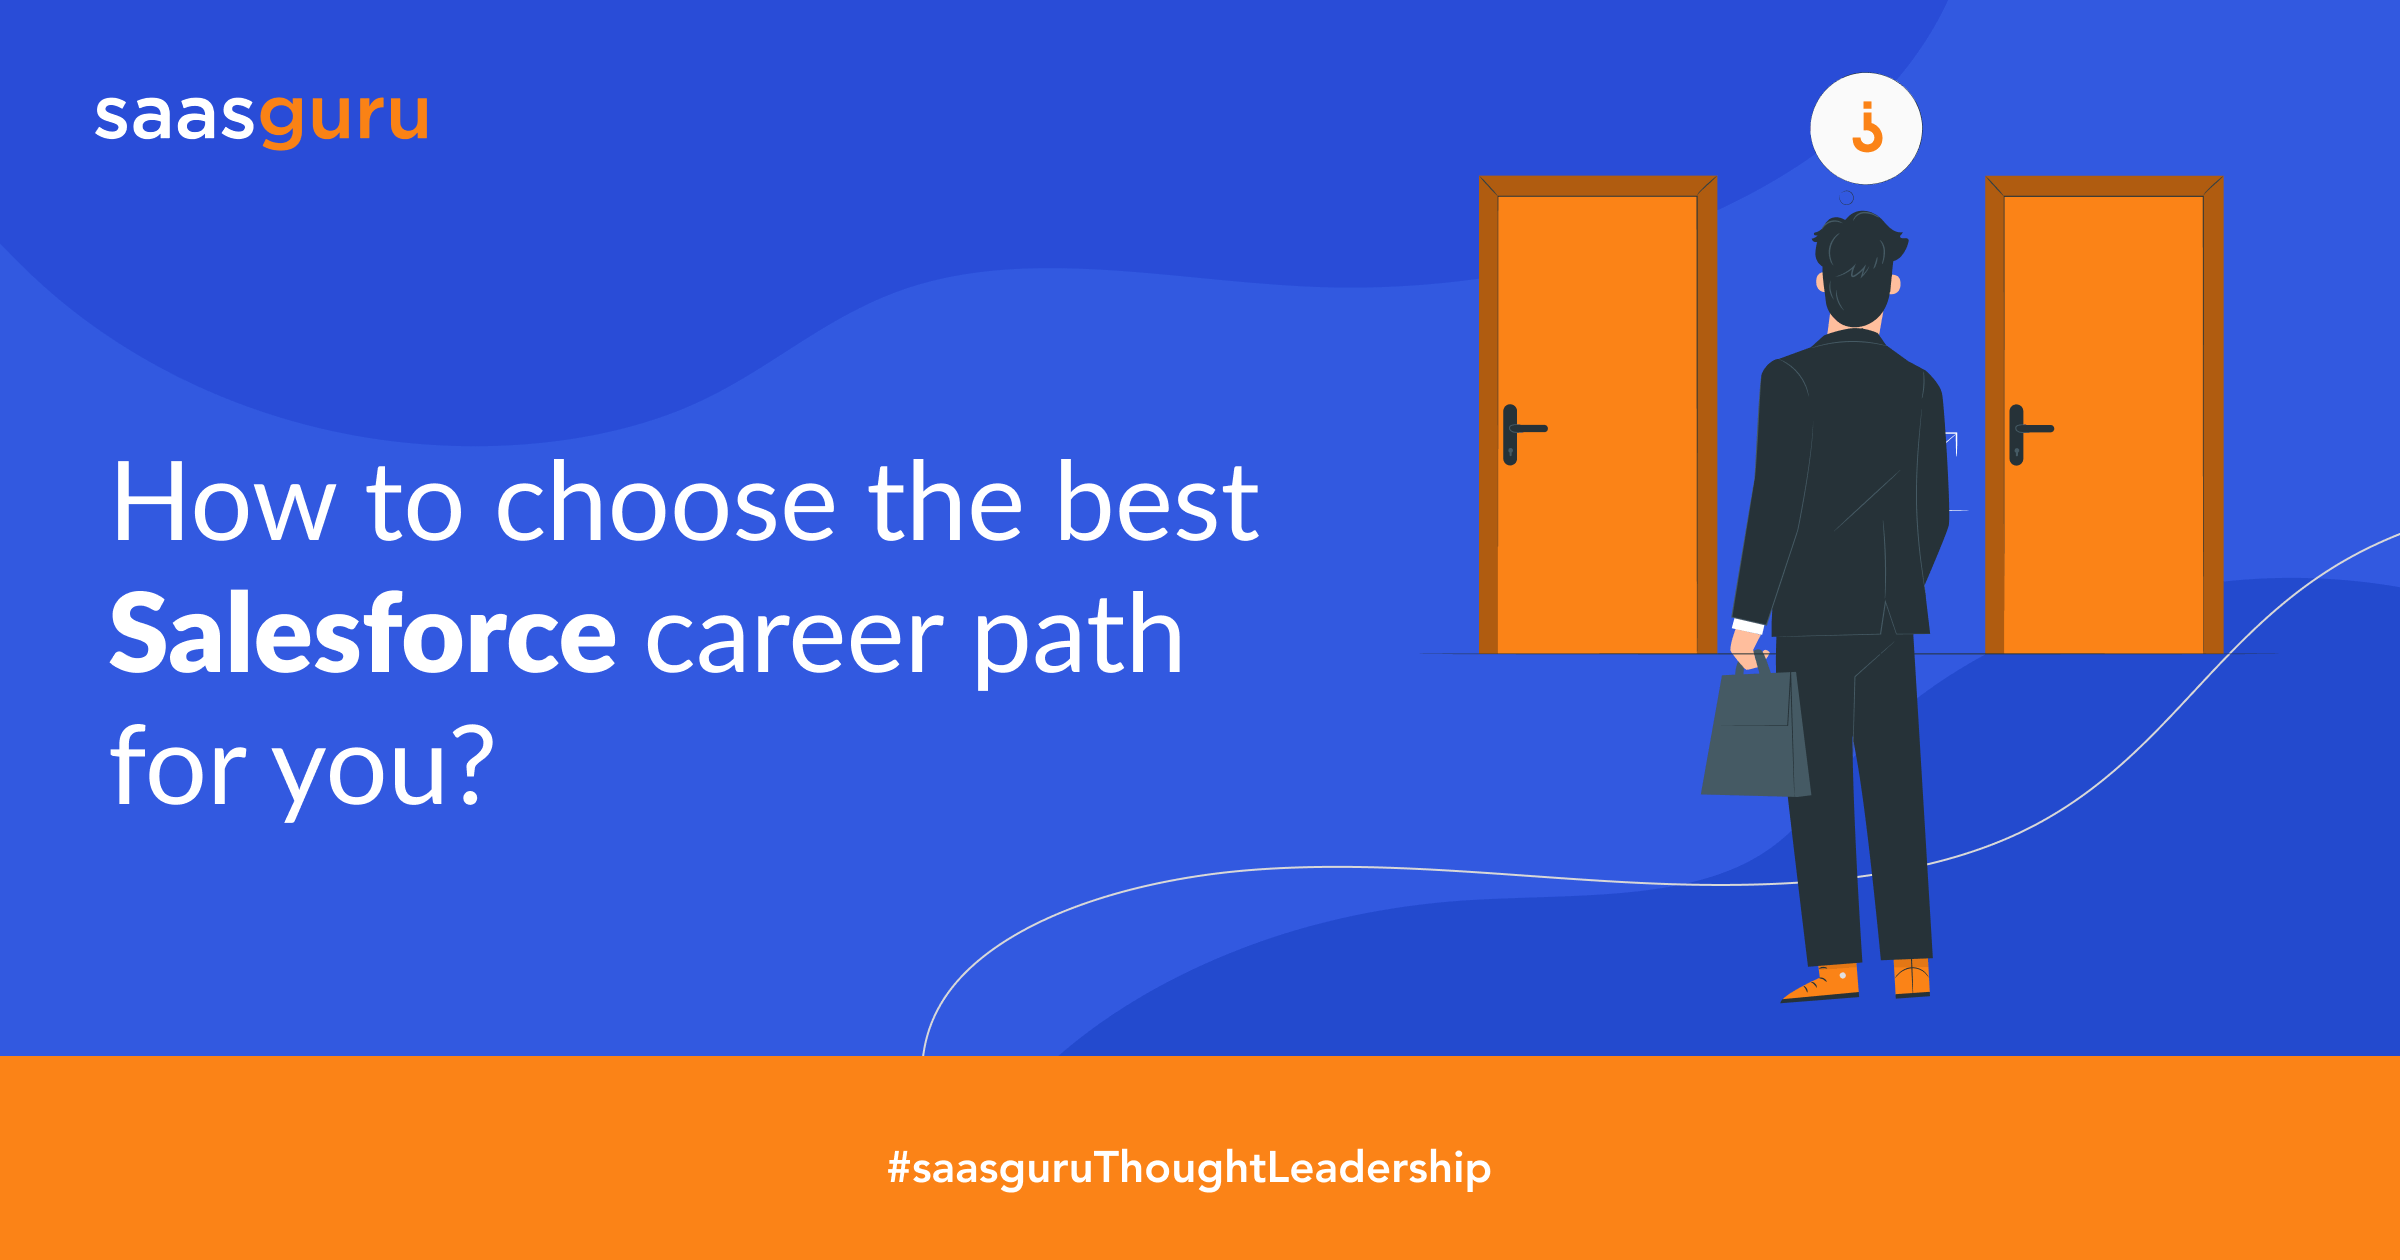 How to choose the best Salesforce career path for you?